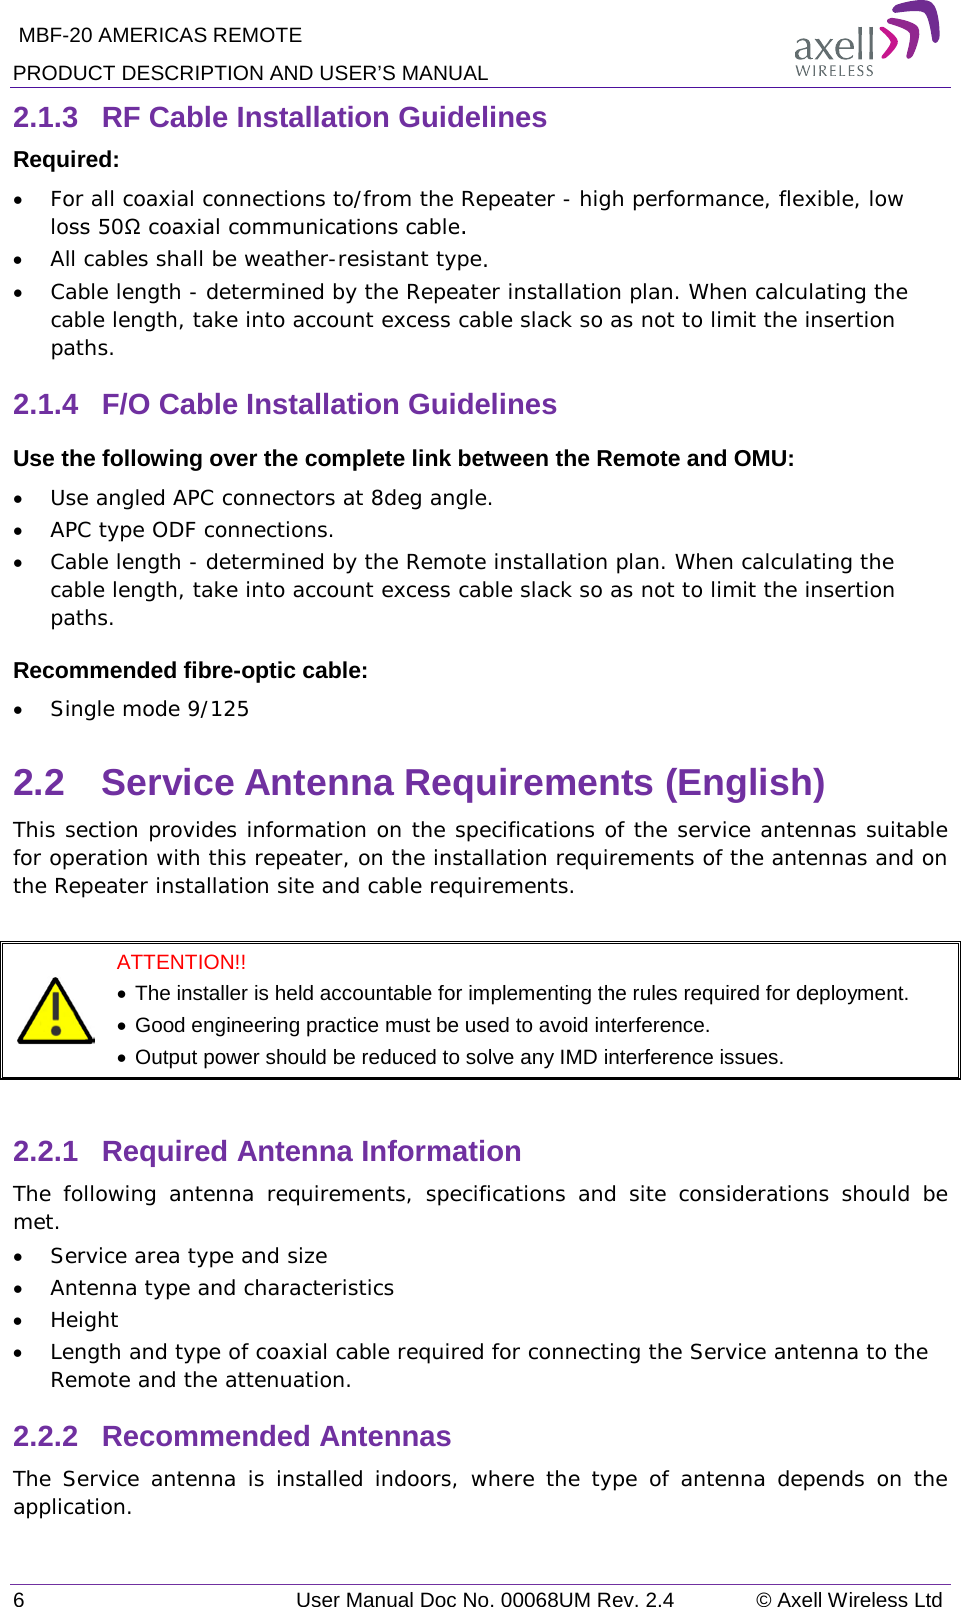  MBF-20 AMERICAS REMOTE PRODUCT DESCRIPTION AND USER’S MANUAL 6   User Manual Doc No. 00068UM Rev. 2.4 © Axell Wireless Ltd 2.1.3  RF Cable Installation Guidelines Required: • For all coaxial connections to/from the Repeater - high performance, flexible, low loss 50Ω coaxial communications cable.  • All cables shall be weather-resistant type.  • Cable length - determined by the Repeater installation plan. When calculating the cable length, take into account excess cable slack so as not to limit the insertion paths. 2.1.4  F/O Cable Installation Guidelines Use the following over the complete link between the Remote and OMU: • Use angled APC connectors at 8deg angle. • APC type ODF connections. • Cable length - determined by the Remote installation plan. When calculating the cable length, take into account excess cable slack so as not to limit the insertion paths. Recommended fibre-optic cable:  • Single mode 9/125 2.2  Service Antenna Requirements (English) This section provides information on the specifications of the service antennas suitable for operation with this repeater, on the installation requirements of the antennas and on the Repeater installation site and cable requirements.   ATTENTION!!  • The installer is held accountable for implementing the rules required for deployment.  • Good engineering practice must be used to avoid interference. • Output power should be reduced to solve any IMD interference issues.  2.2.1  Required Antenna Information  The following antenna requirements, specifications and site considerations should be met. • Service area type and size  • Antenna type and characteristics • Height • Length and type of coaxial cable required for connecting the Service antenna to the Remote and the attenuation. 2.2.2  Recommended Antennas  The Service antenna is installed indoors, where the type of antenna depends on the application. 